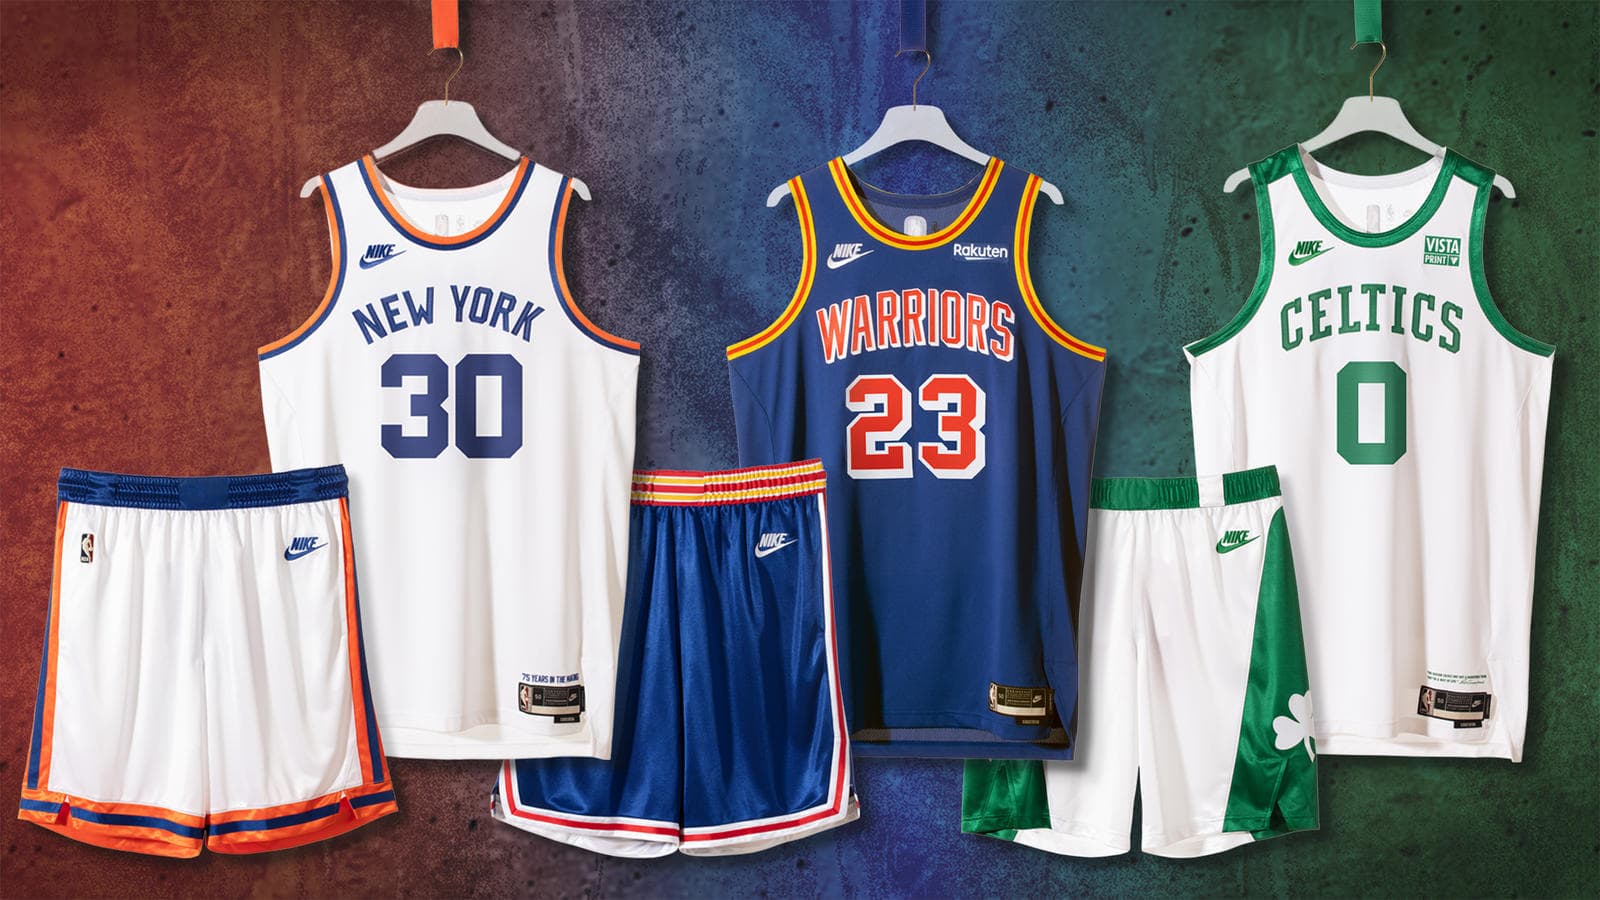 4 best places to buy nba jerseys